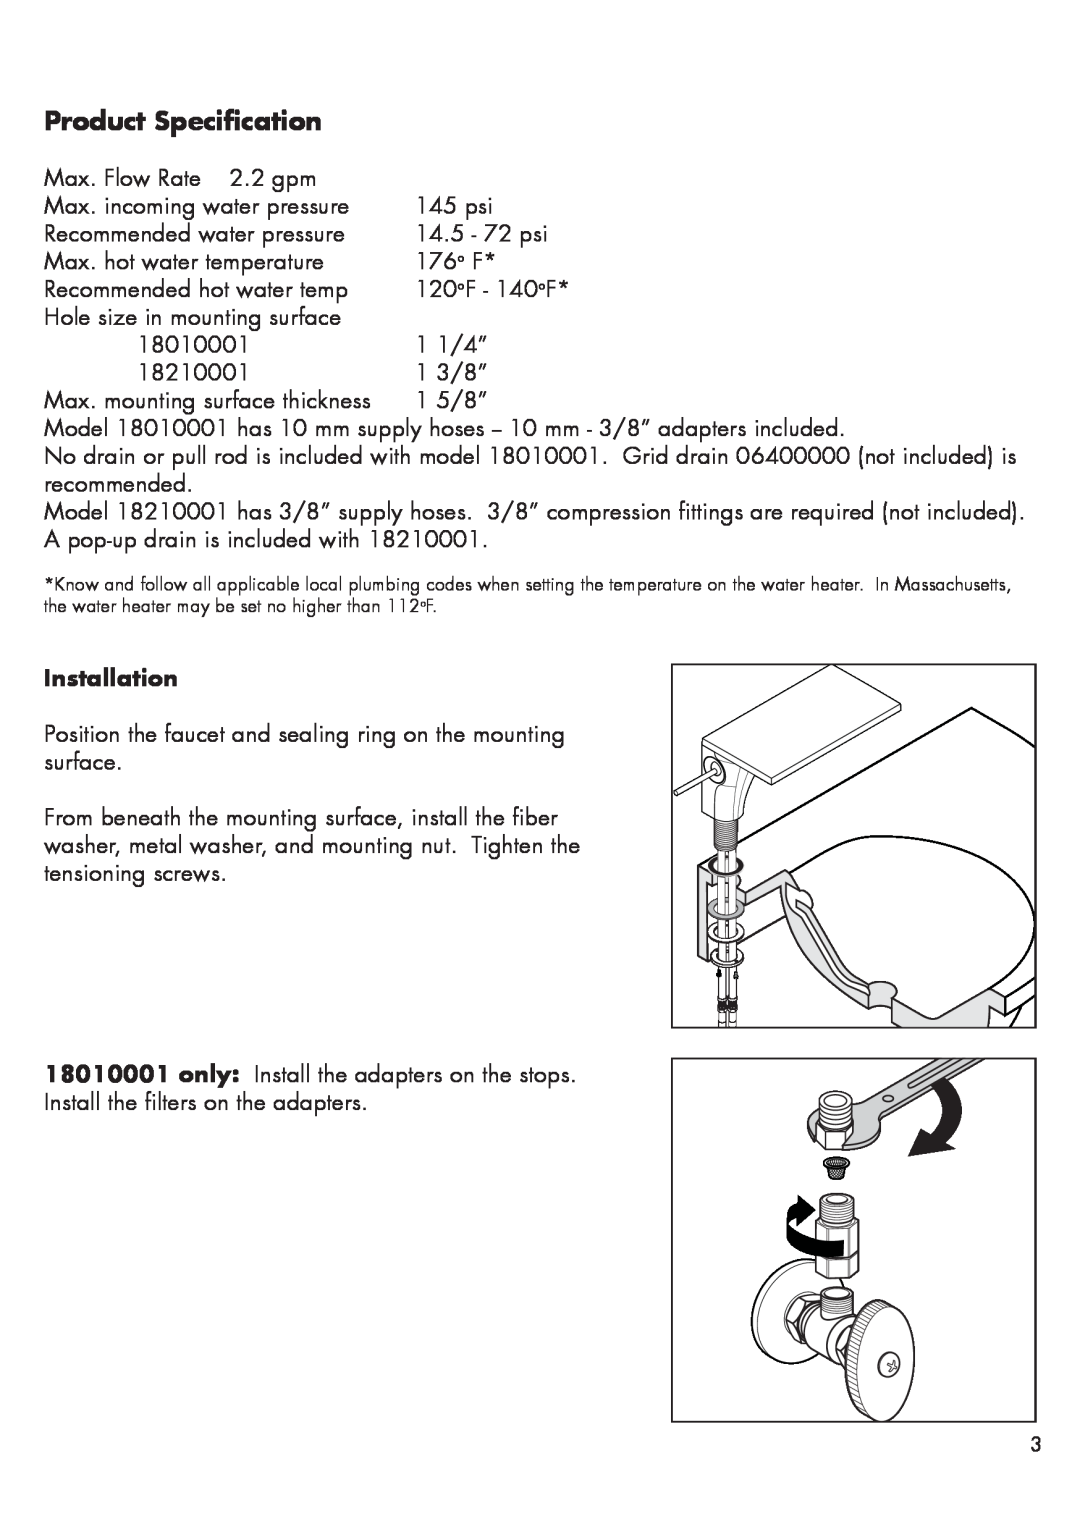 Hans Grohe 18010001, 18210001 installation instructions Product Specification, Installation 